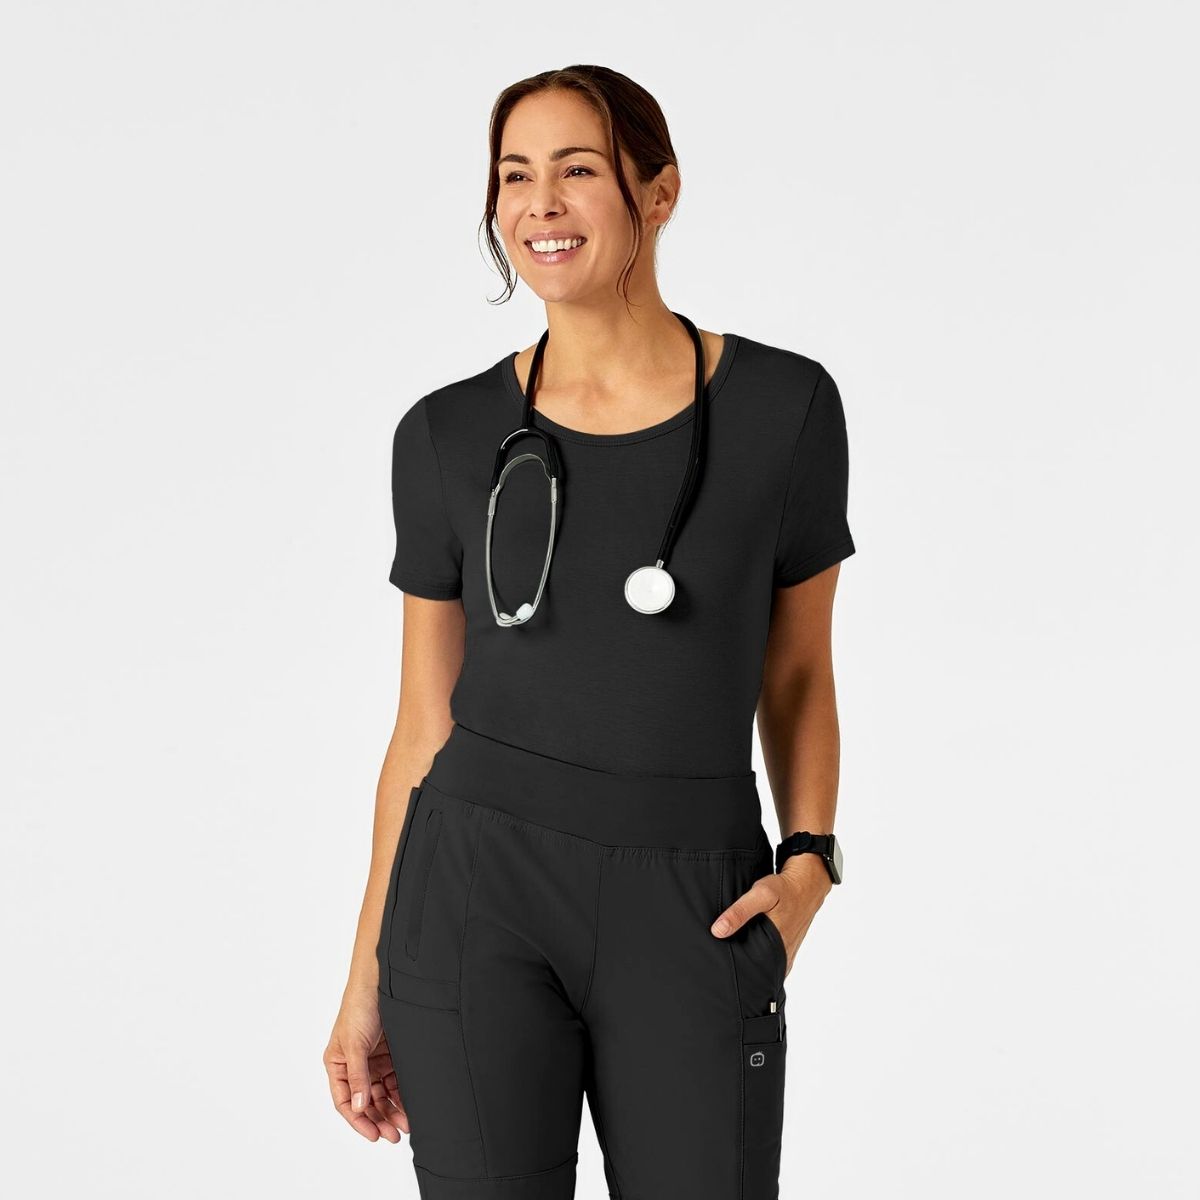 Looking For The Perfect Base Layer To Wear Under Scrubs? Check